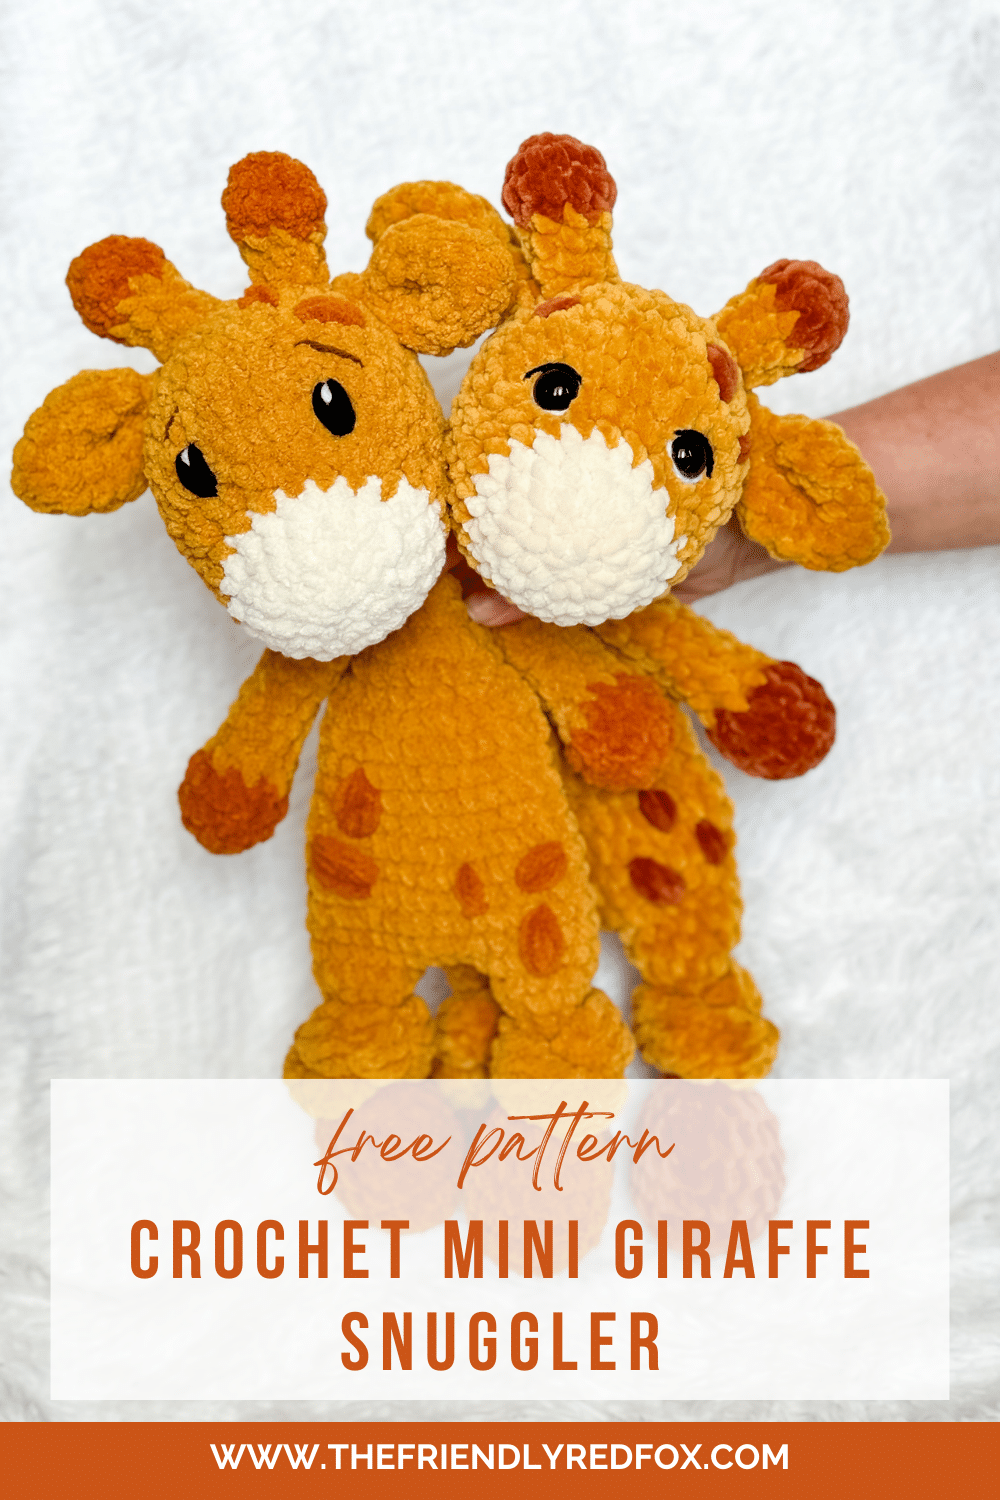 This is a free crochet snuggler pattern of the cuddly classic giraffe! Half stuffed animal, half blanket but twice the fun! This crochet giraffe lovey would be a great crocheted nursery gift! Embroidered eyes and blanket yarn make it more baby friendly.